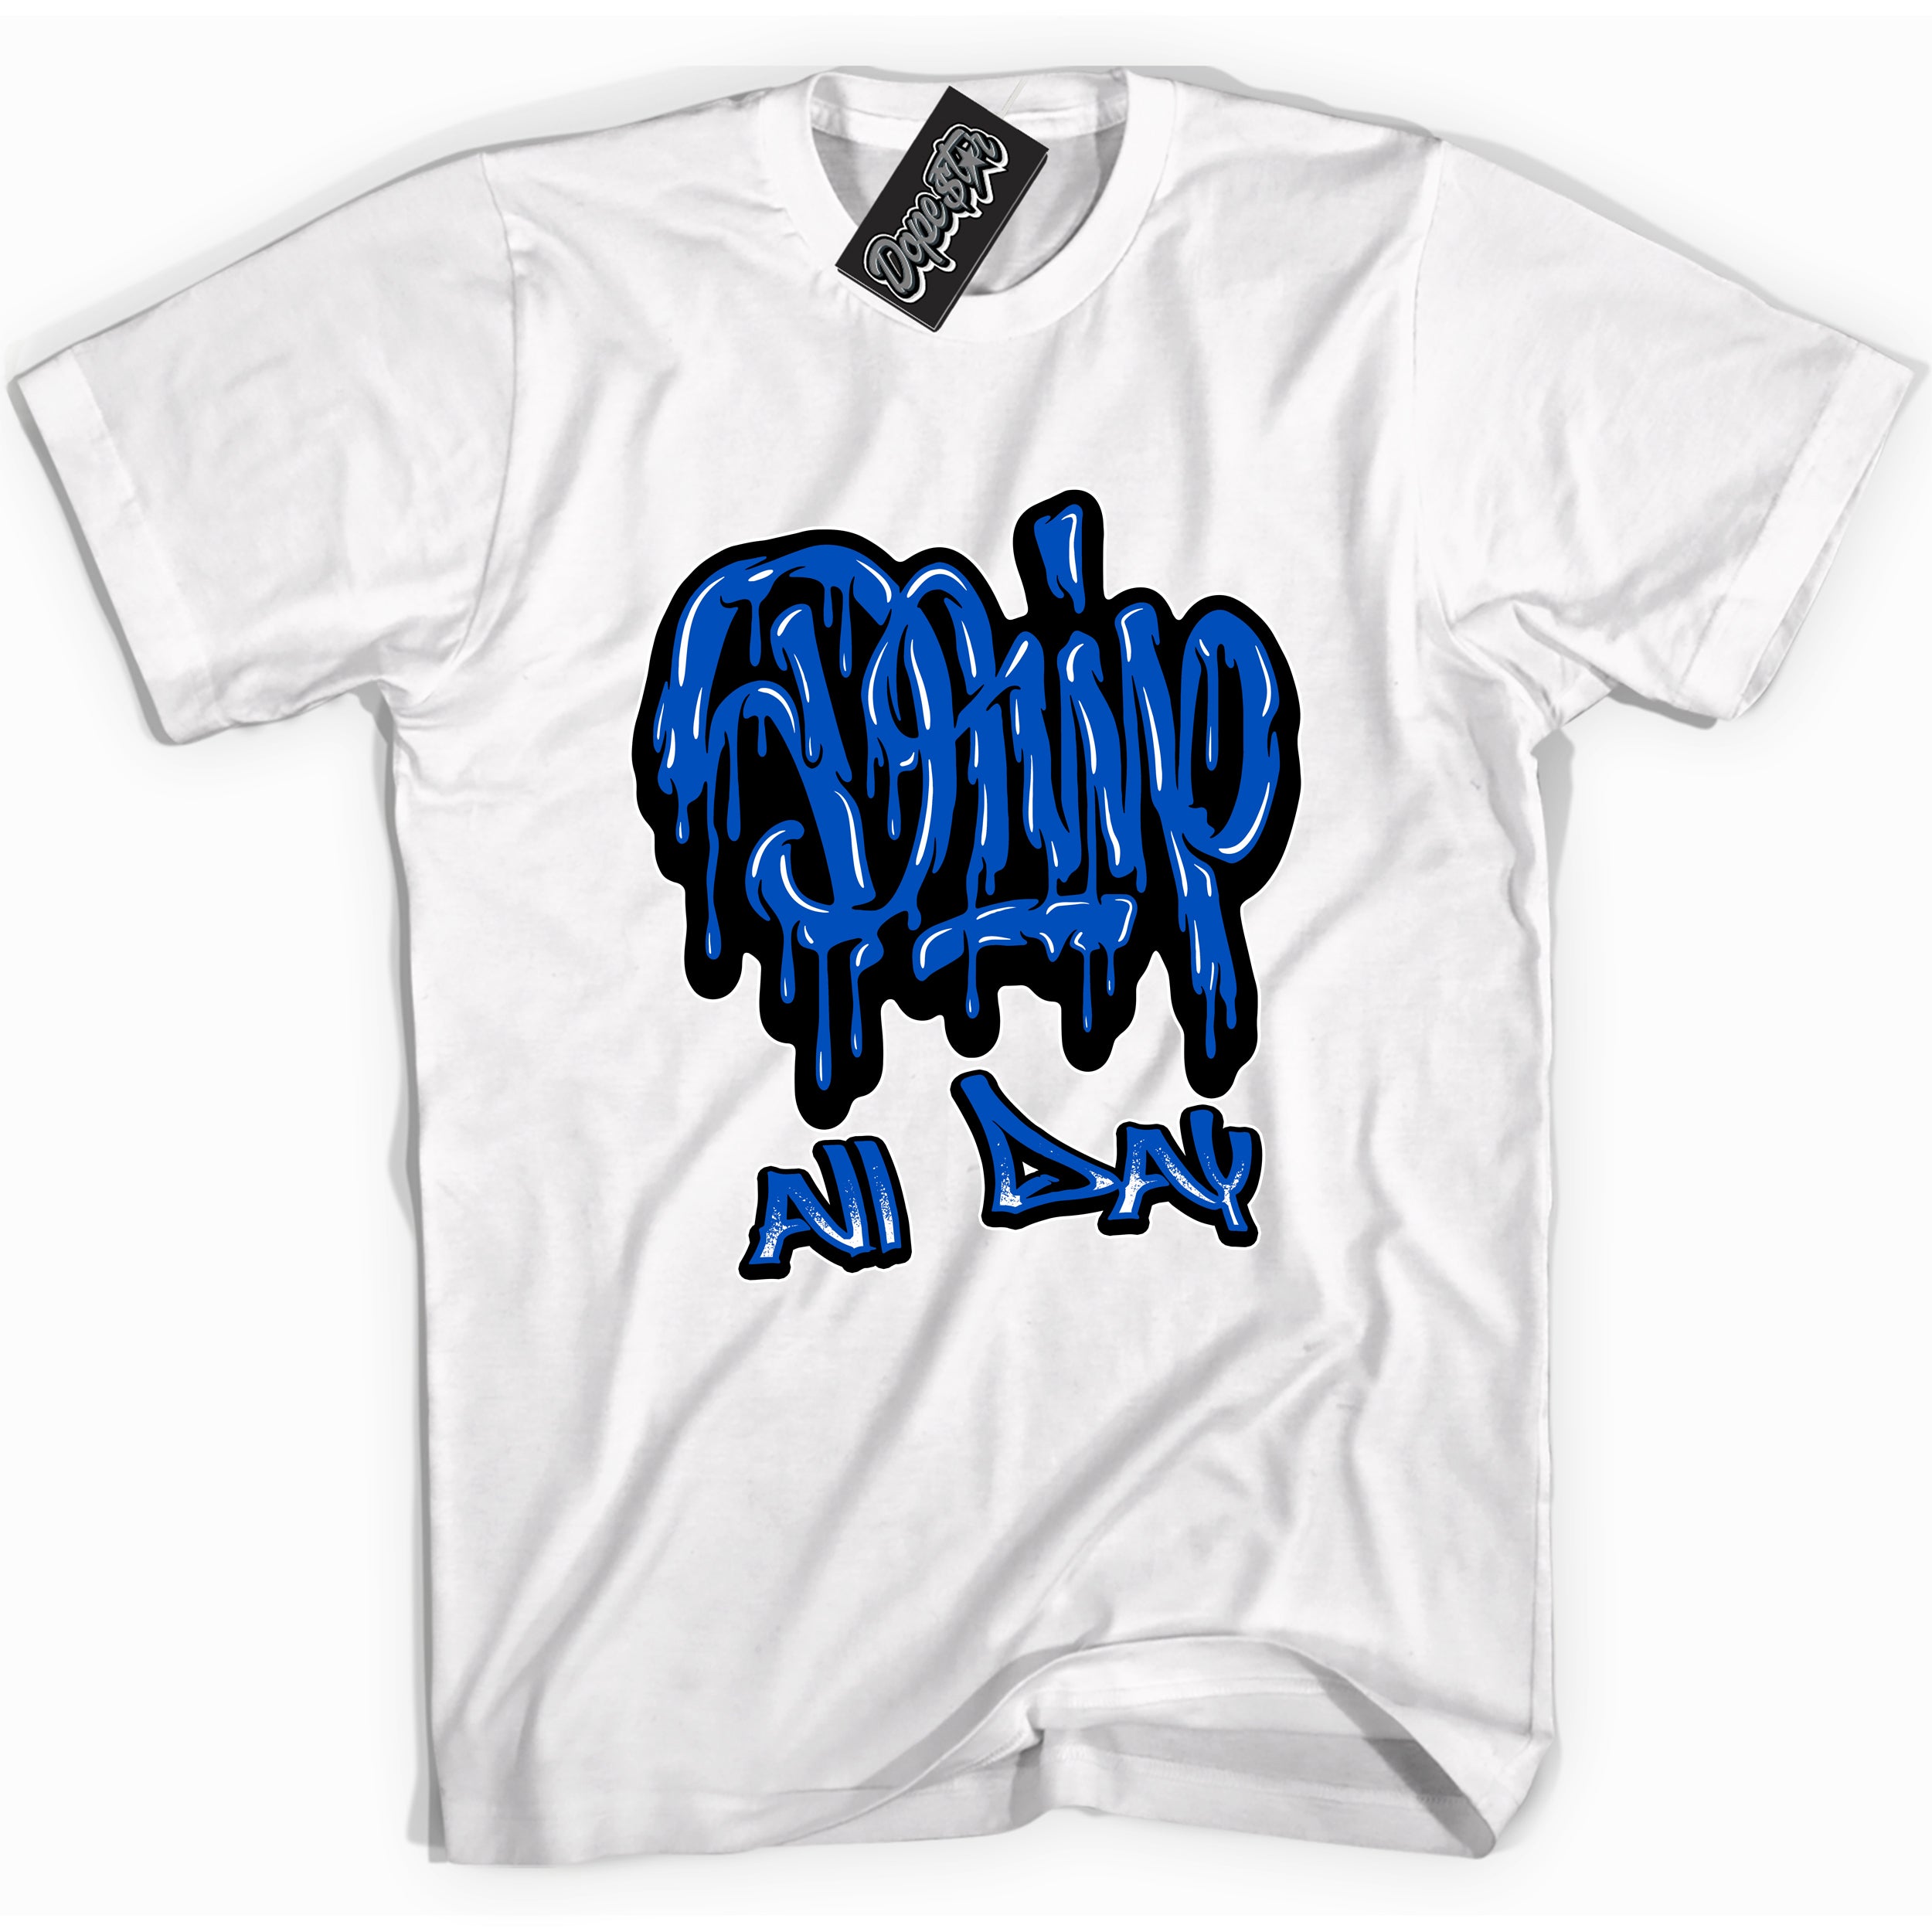 Cool White graphic tee with "Drip All Day" design, that perfectly matches Royal Reimagined 1s sneakers 